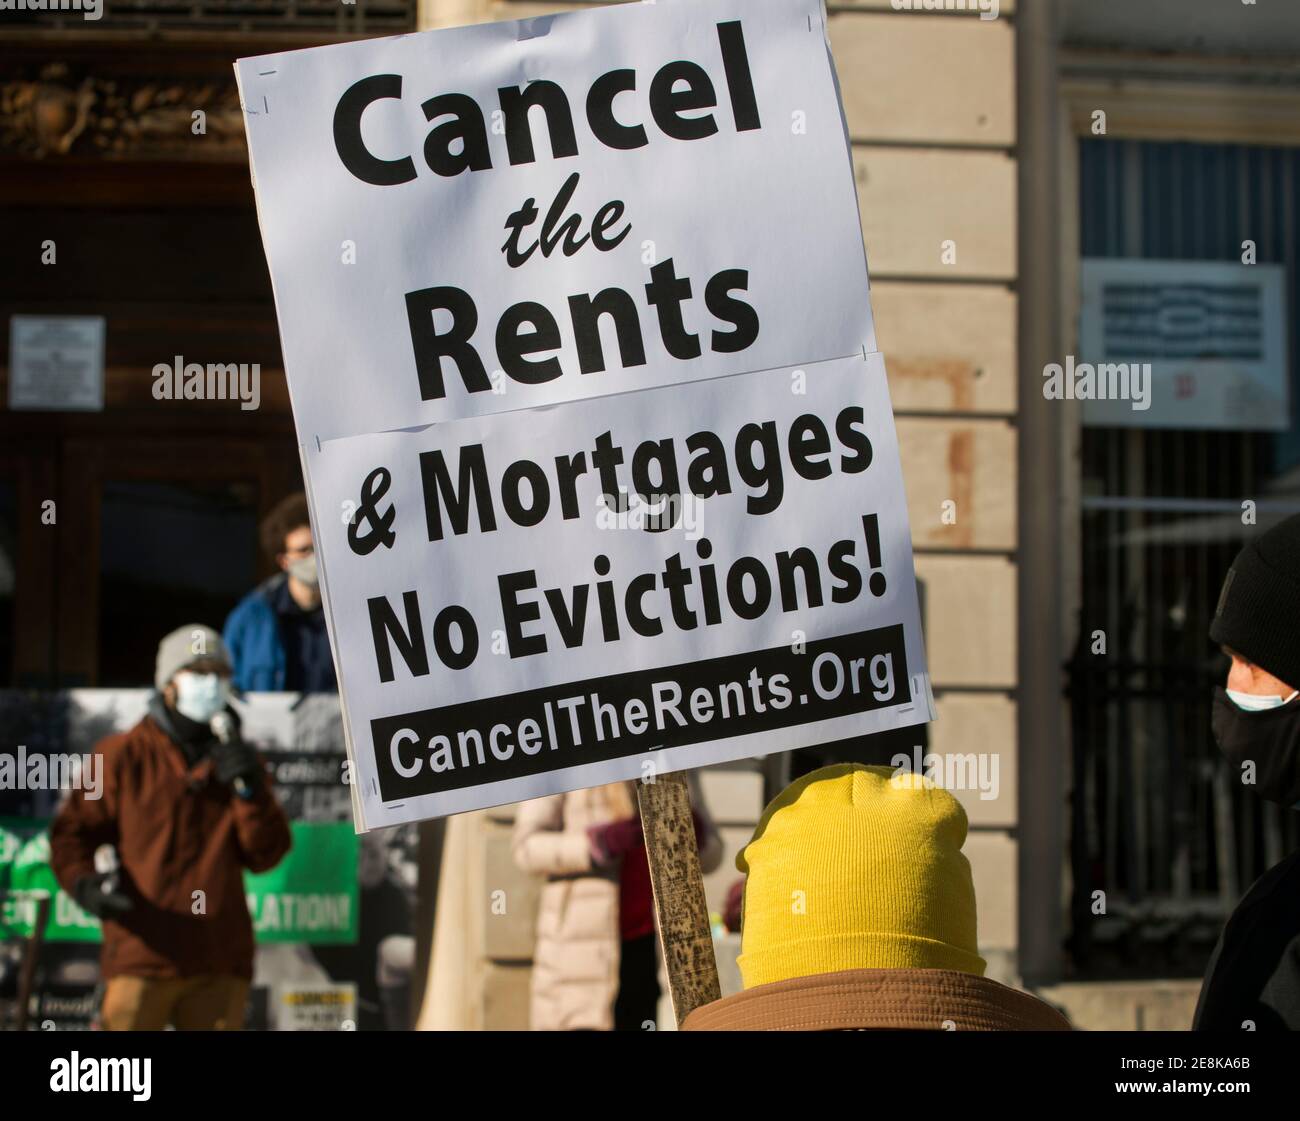 Boston, Massachusetts, USA. 30th Jan 2021:  Cancel the Rents & Mortgages demonstration.  About 50 Boston Residents gathered on a cold winter day during a National Day of Action to call for rents and mortgages be canceled due to the financial insecurity caused by the Coronavirus, COVID-19, pandemic. Credit: Chuck Nacke/Alamy Live News Stock Photo